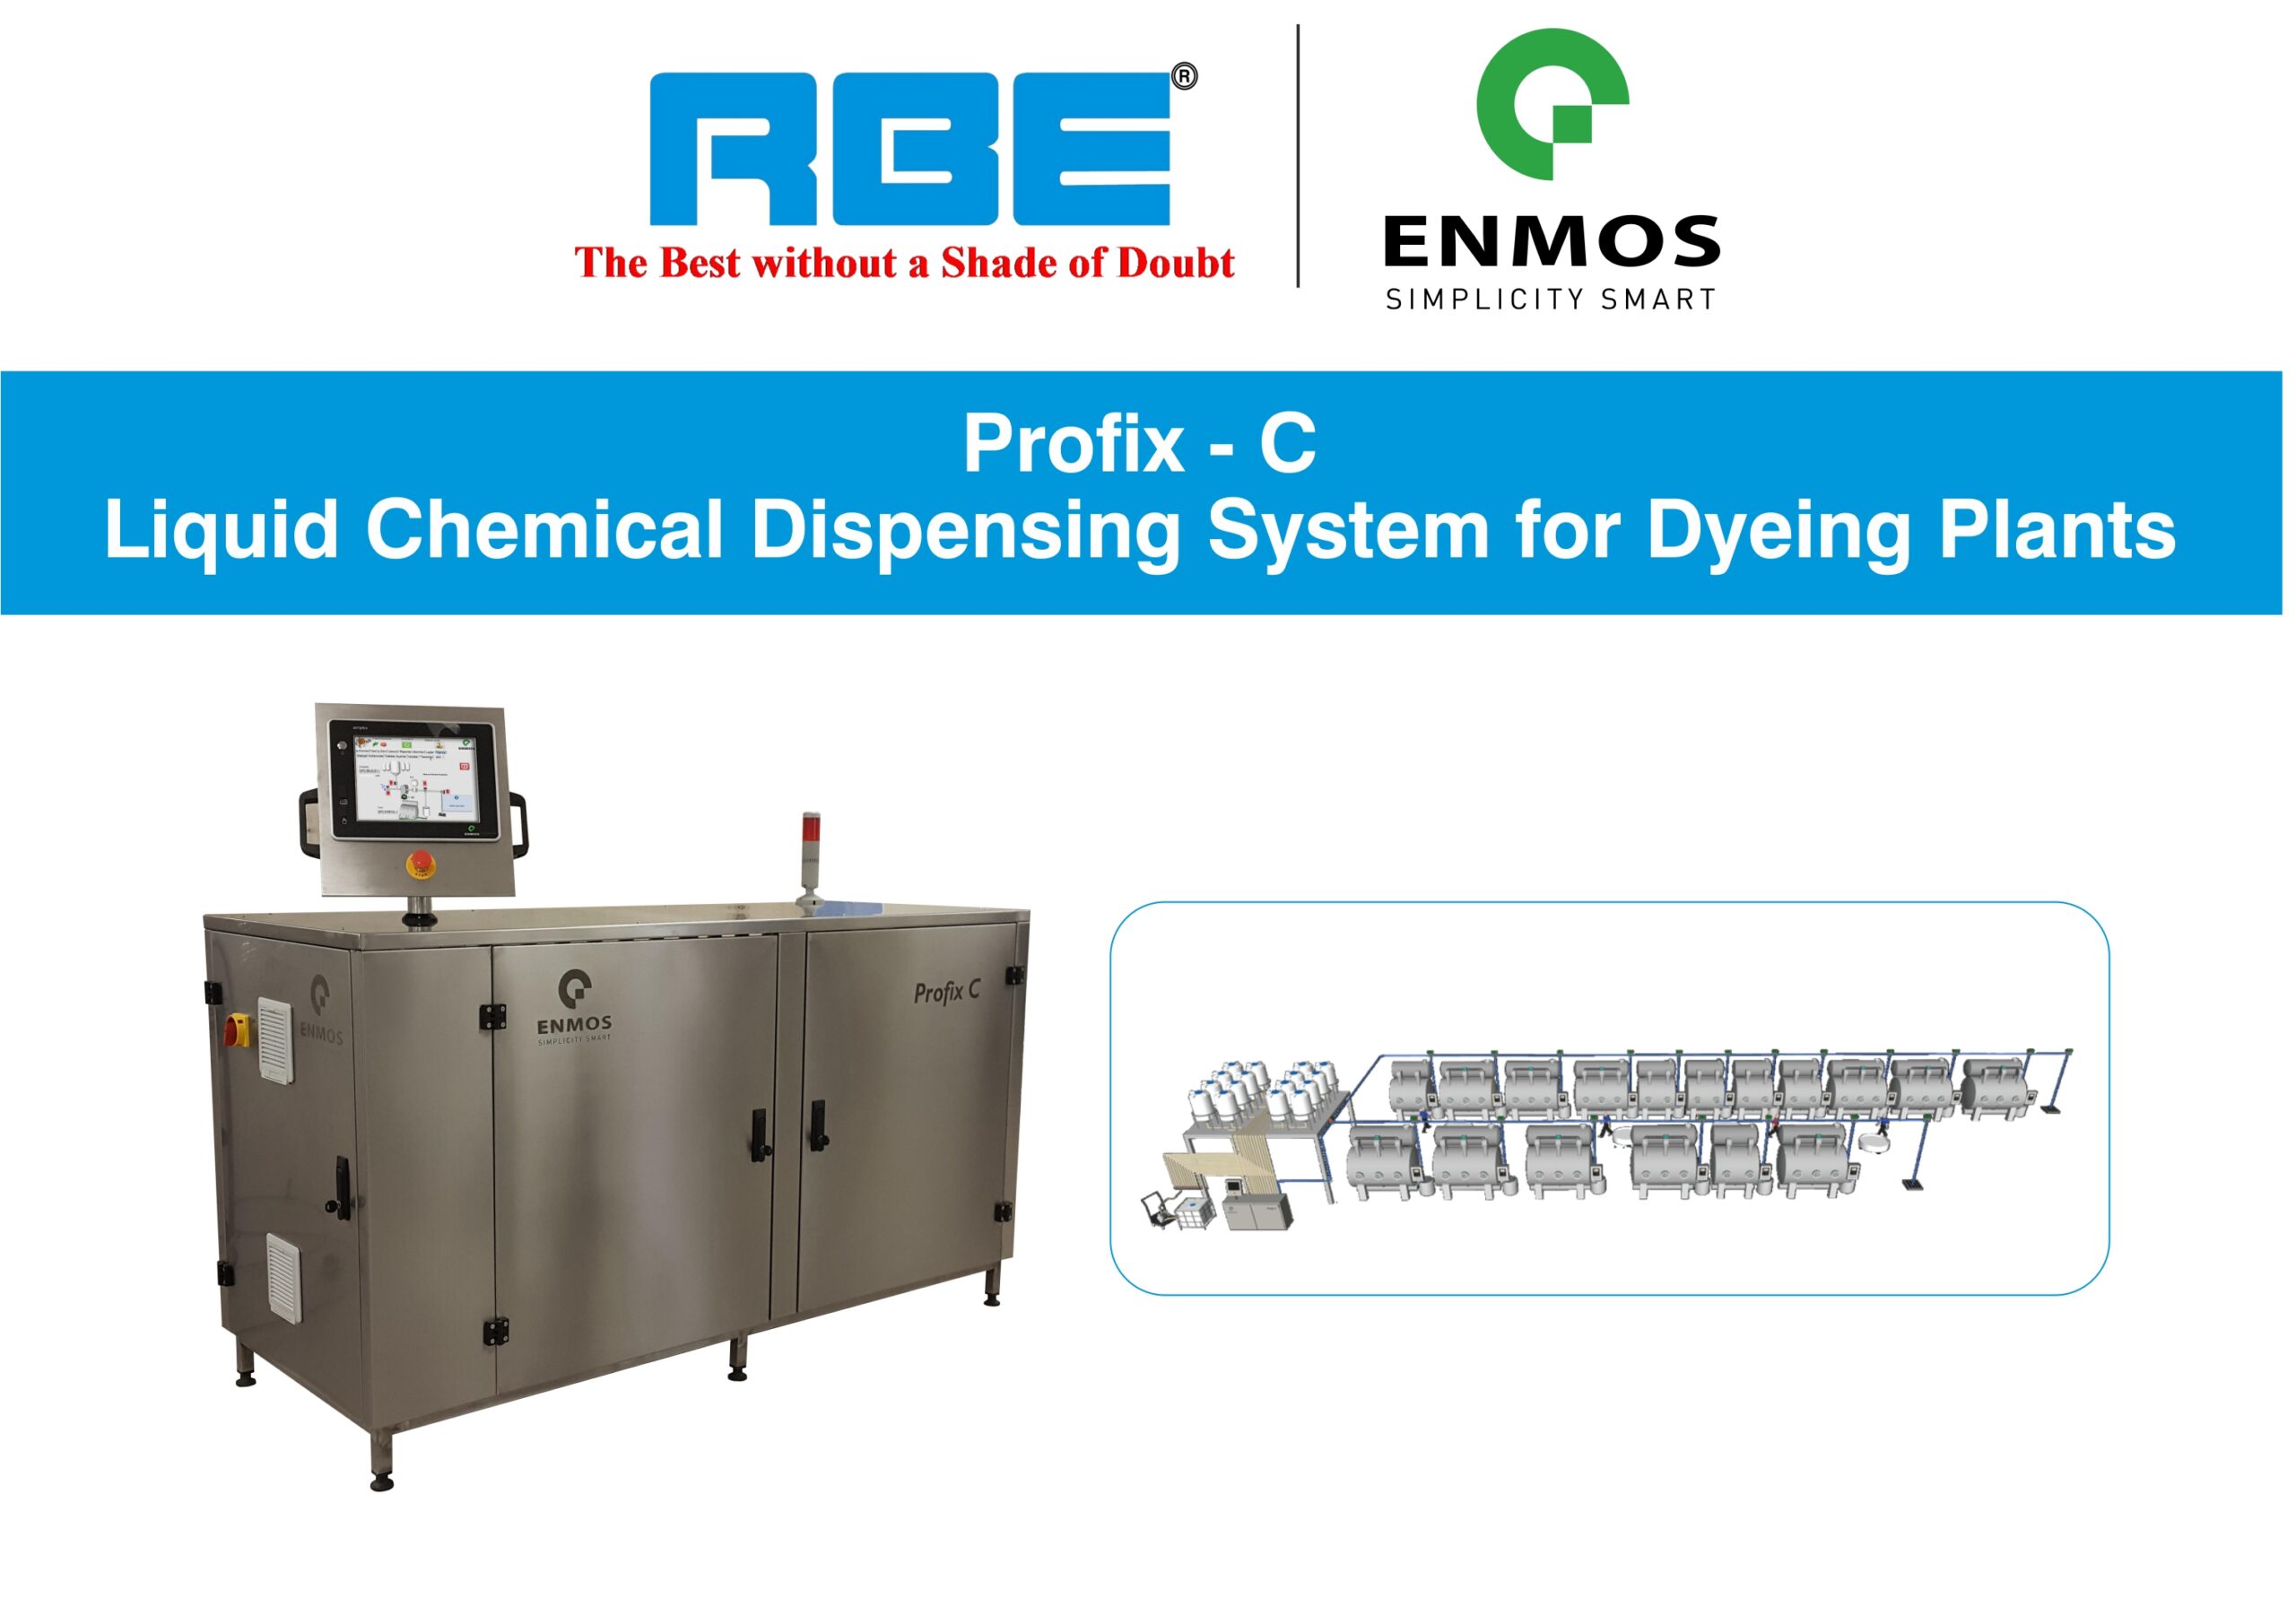 Profix C – Liquid Chemical Dispensing System for Dyeing Plants